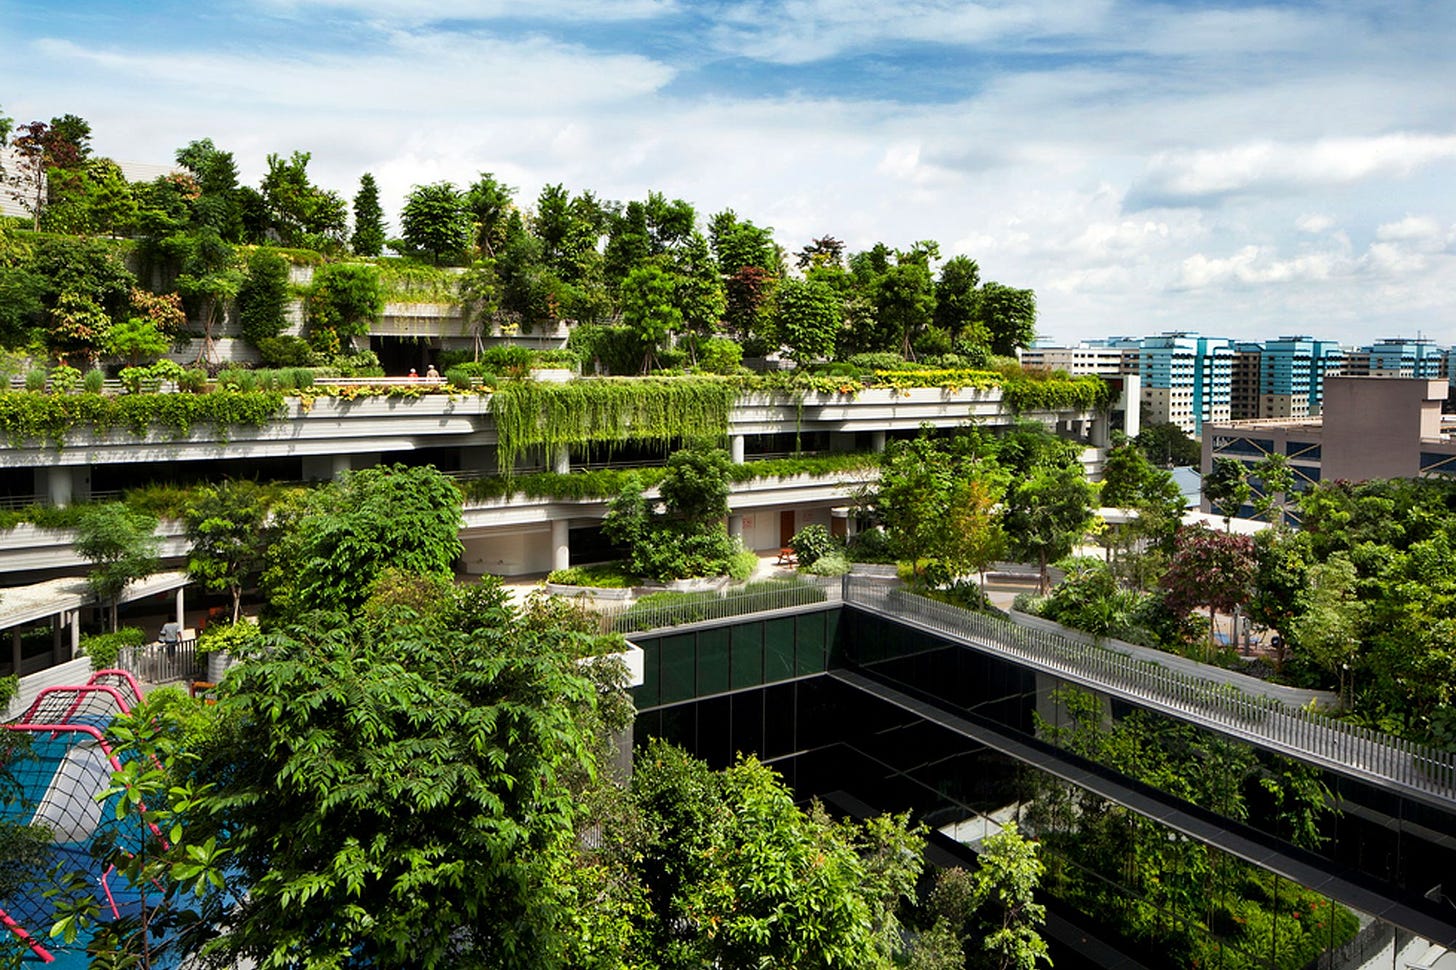 Designed by WOHA Architects, Kampung Admiralty aims to foster a kampung spirit among the elderly Image: Courtesy of WOHA Architect